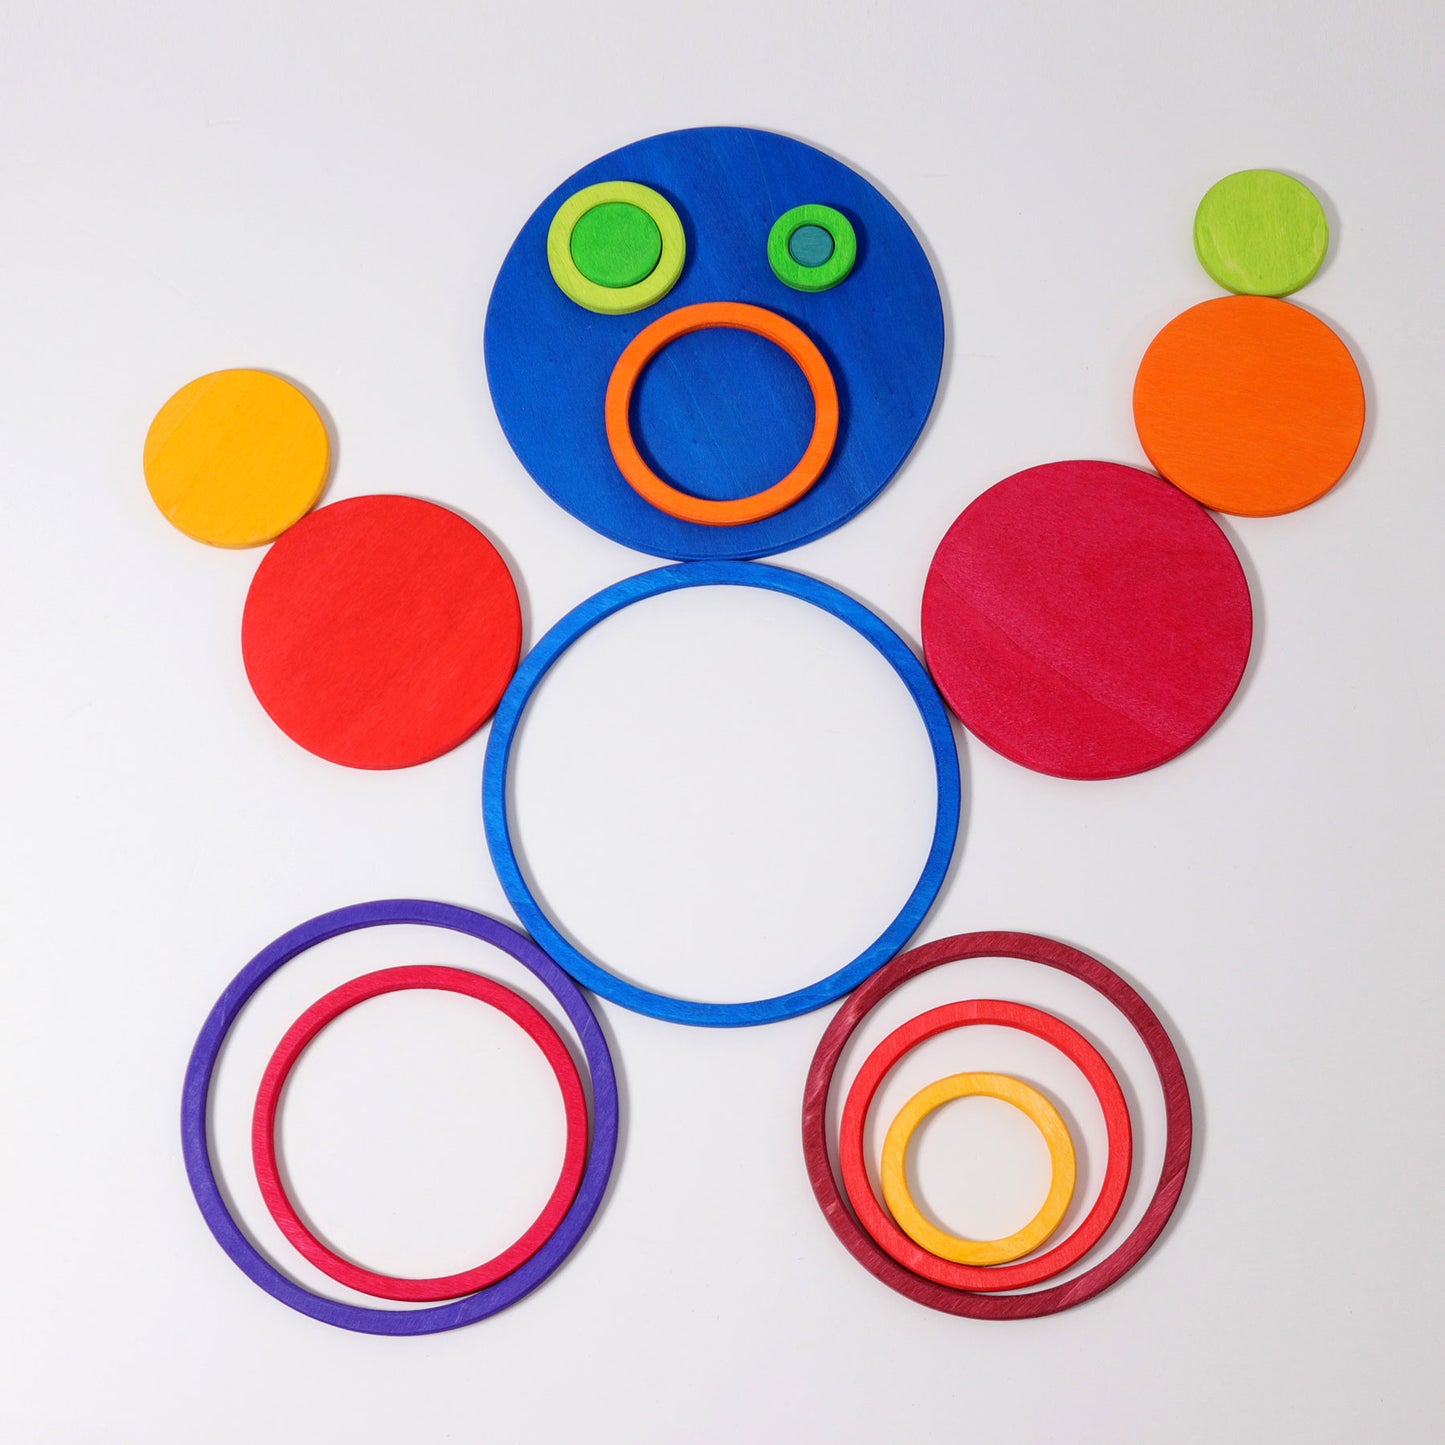 Grimm's Concentric Circles and Rings - Bueno Blocks